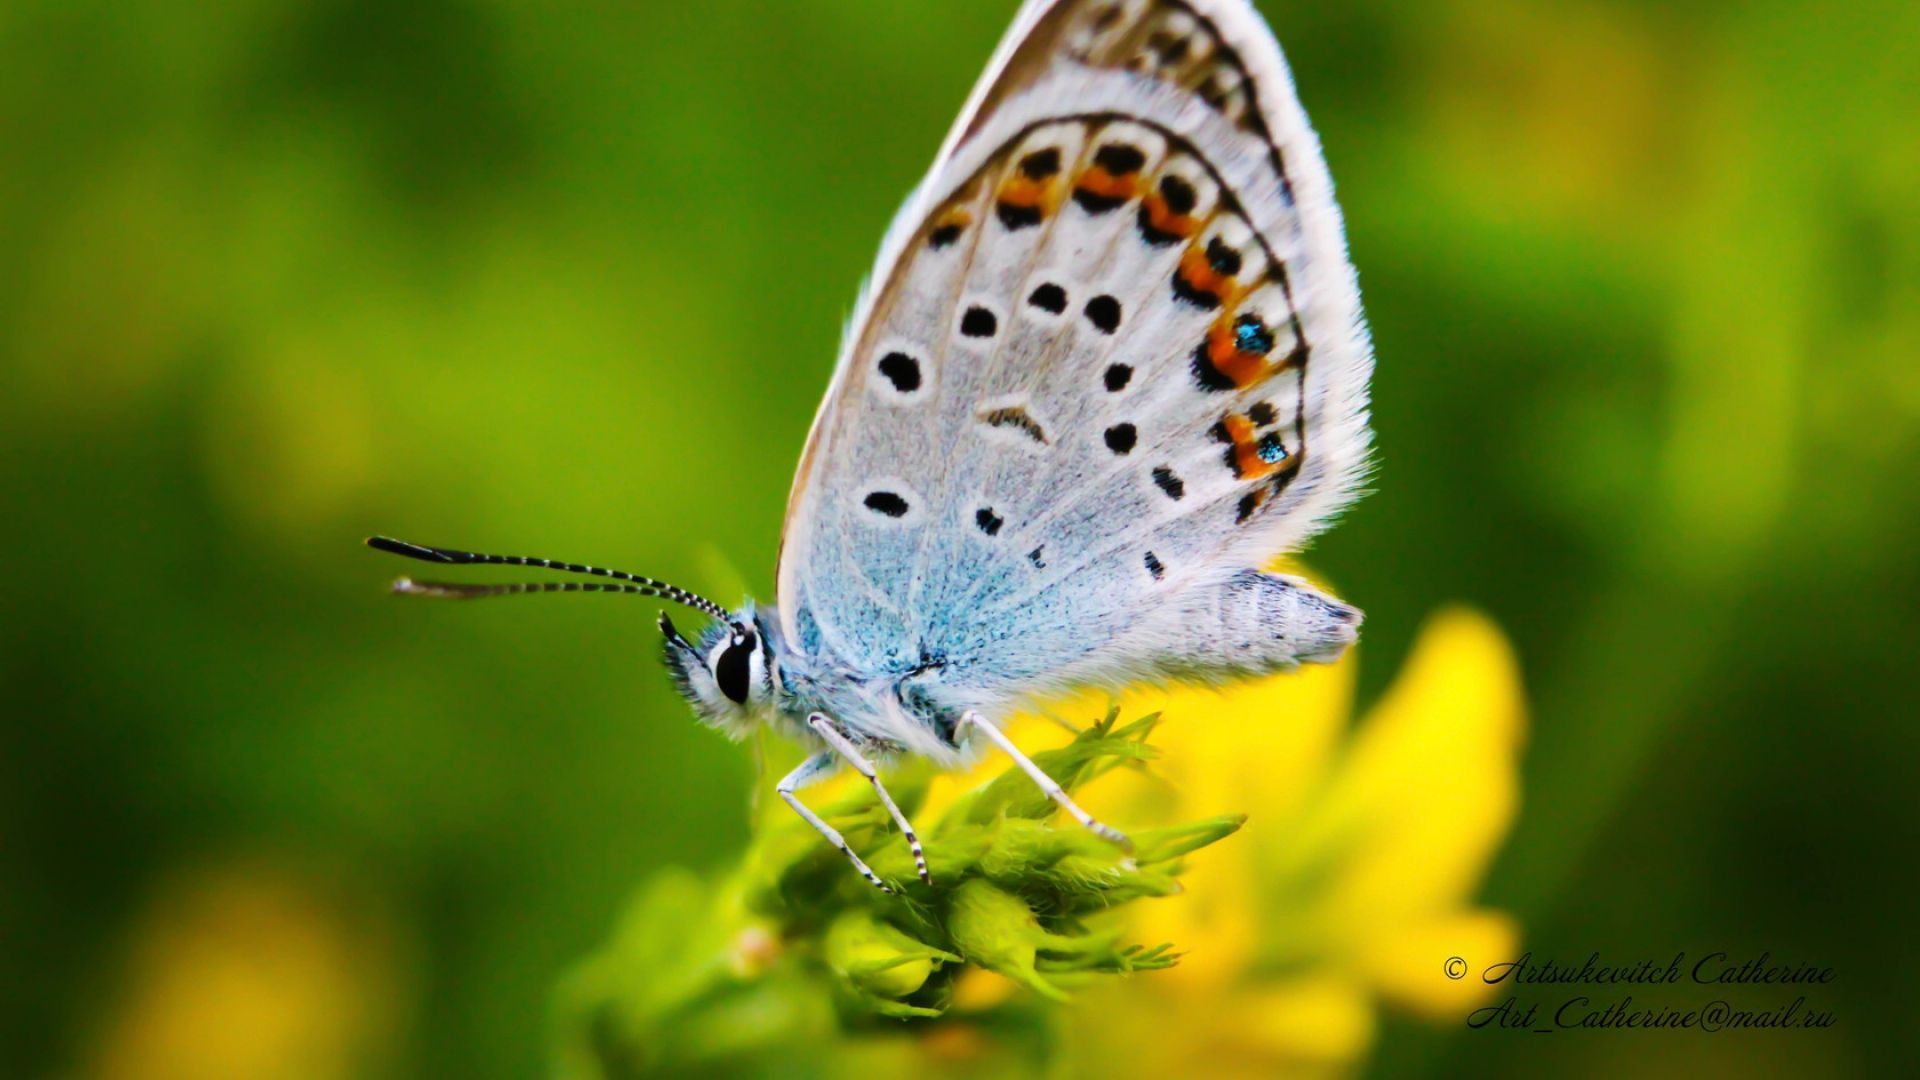 Download Wallpaper 1920x1080 Butterfly, Blues, Marco, Insects ...